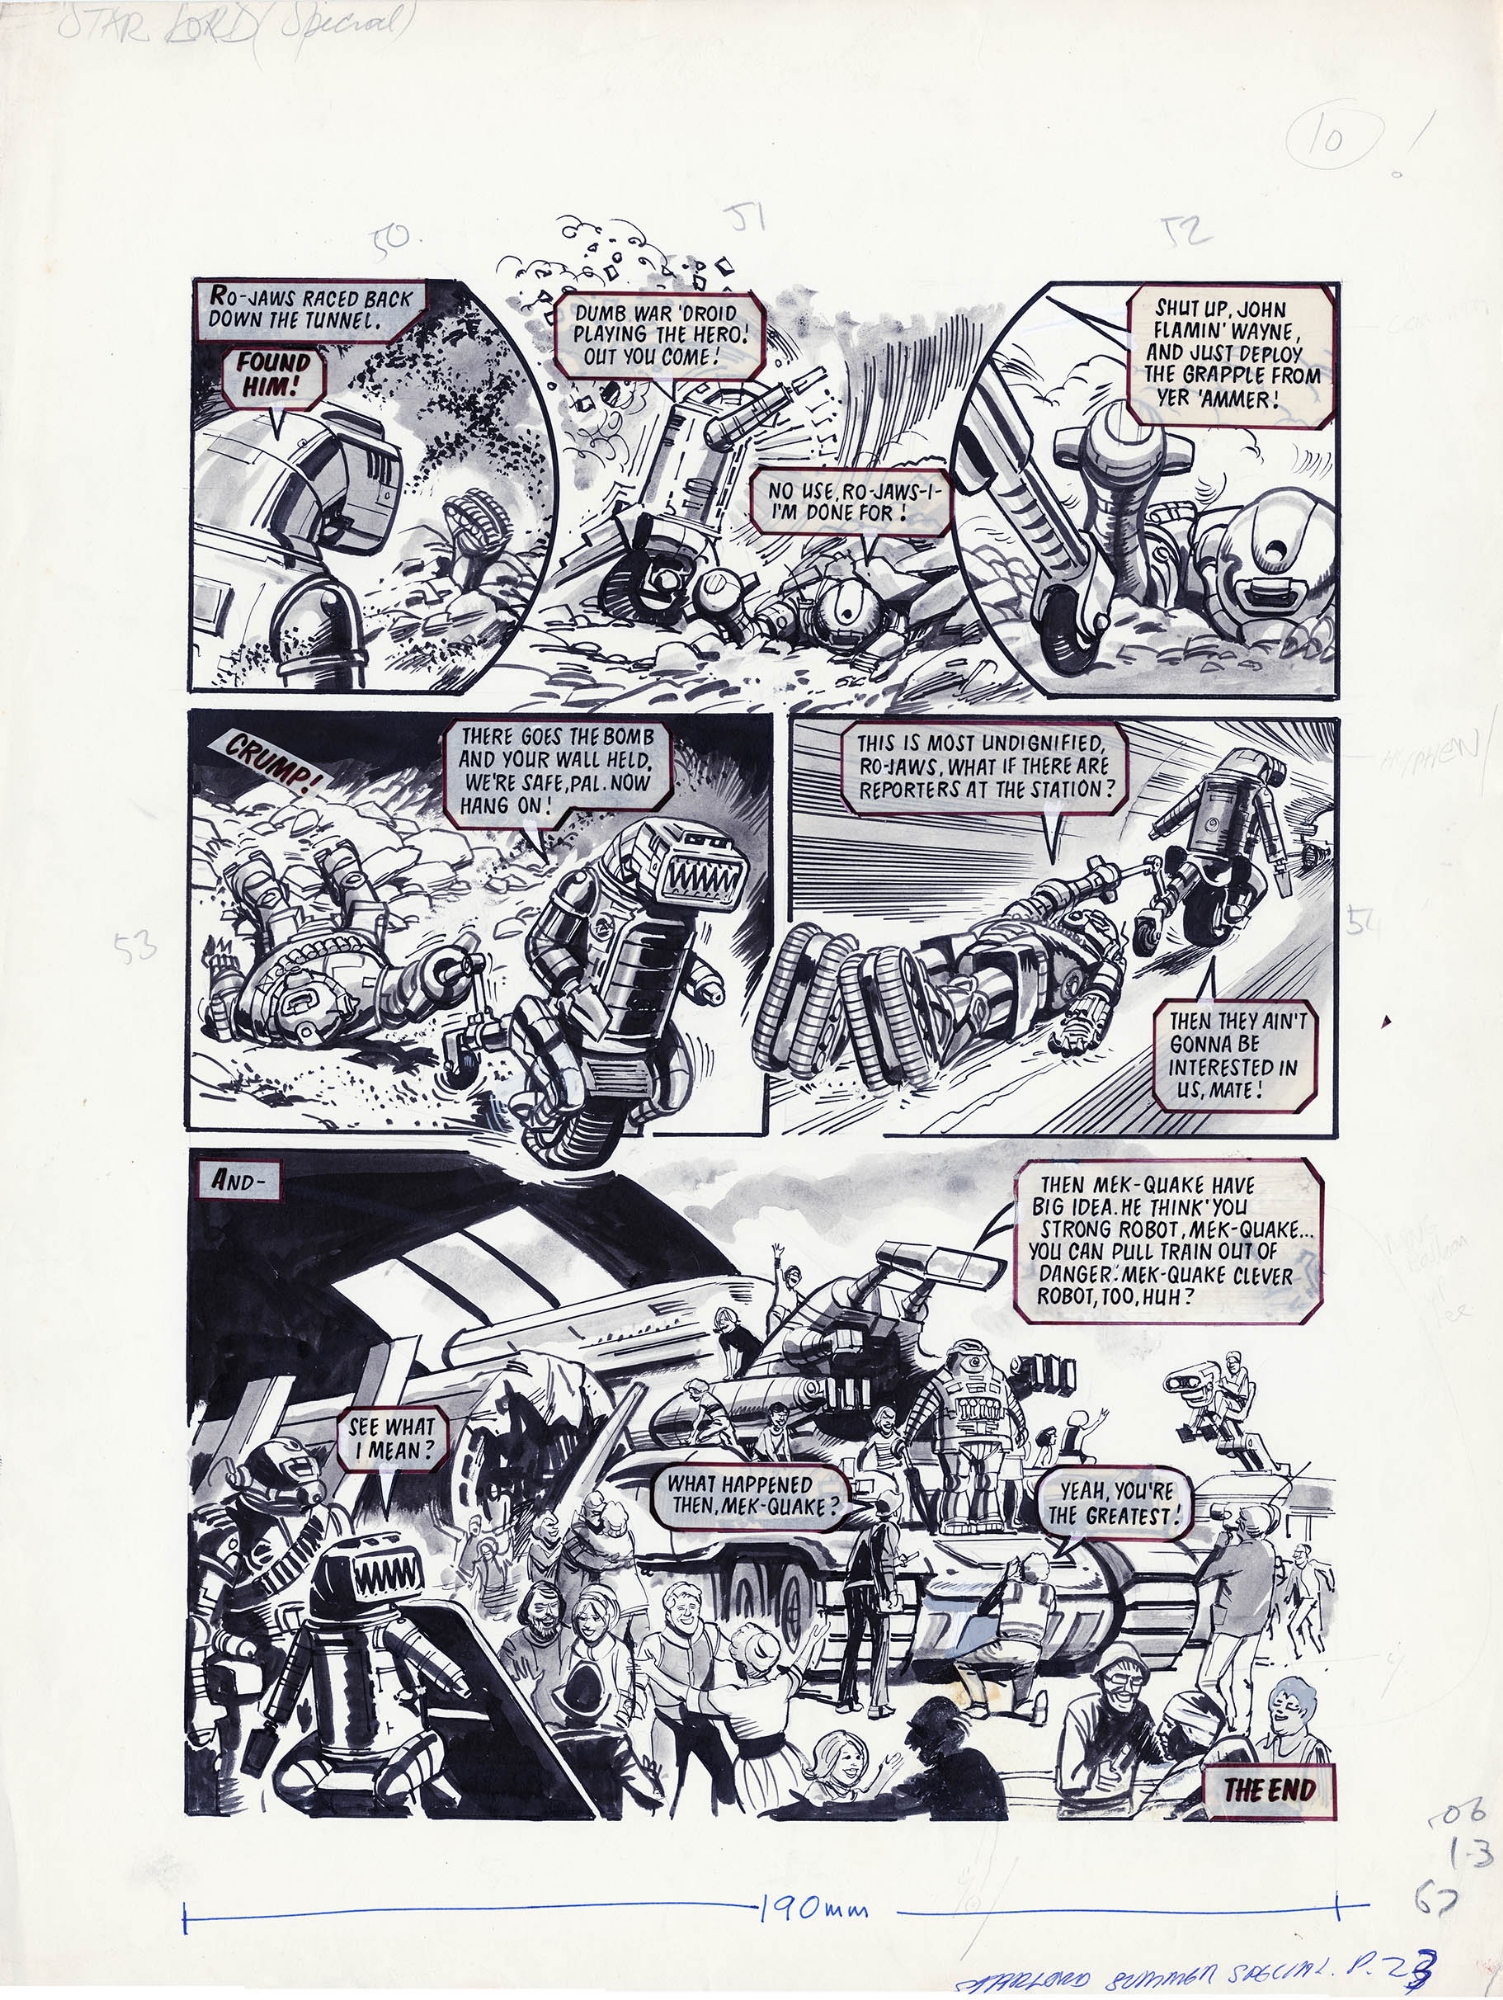 Robusters Starlord Summer Special 1978 Page 10 Geoff Campion